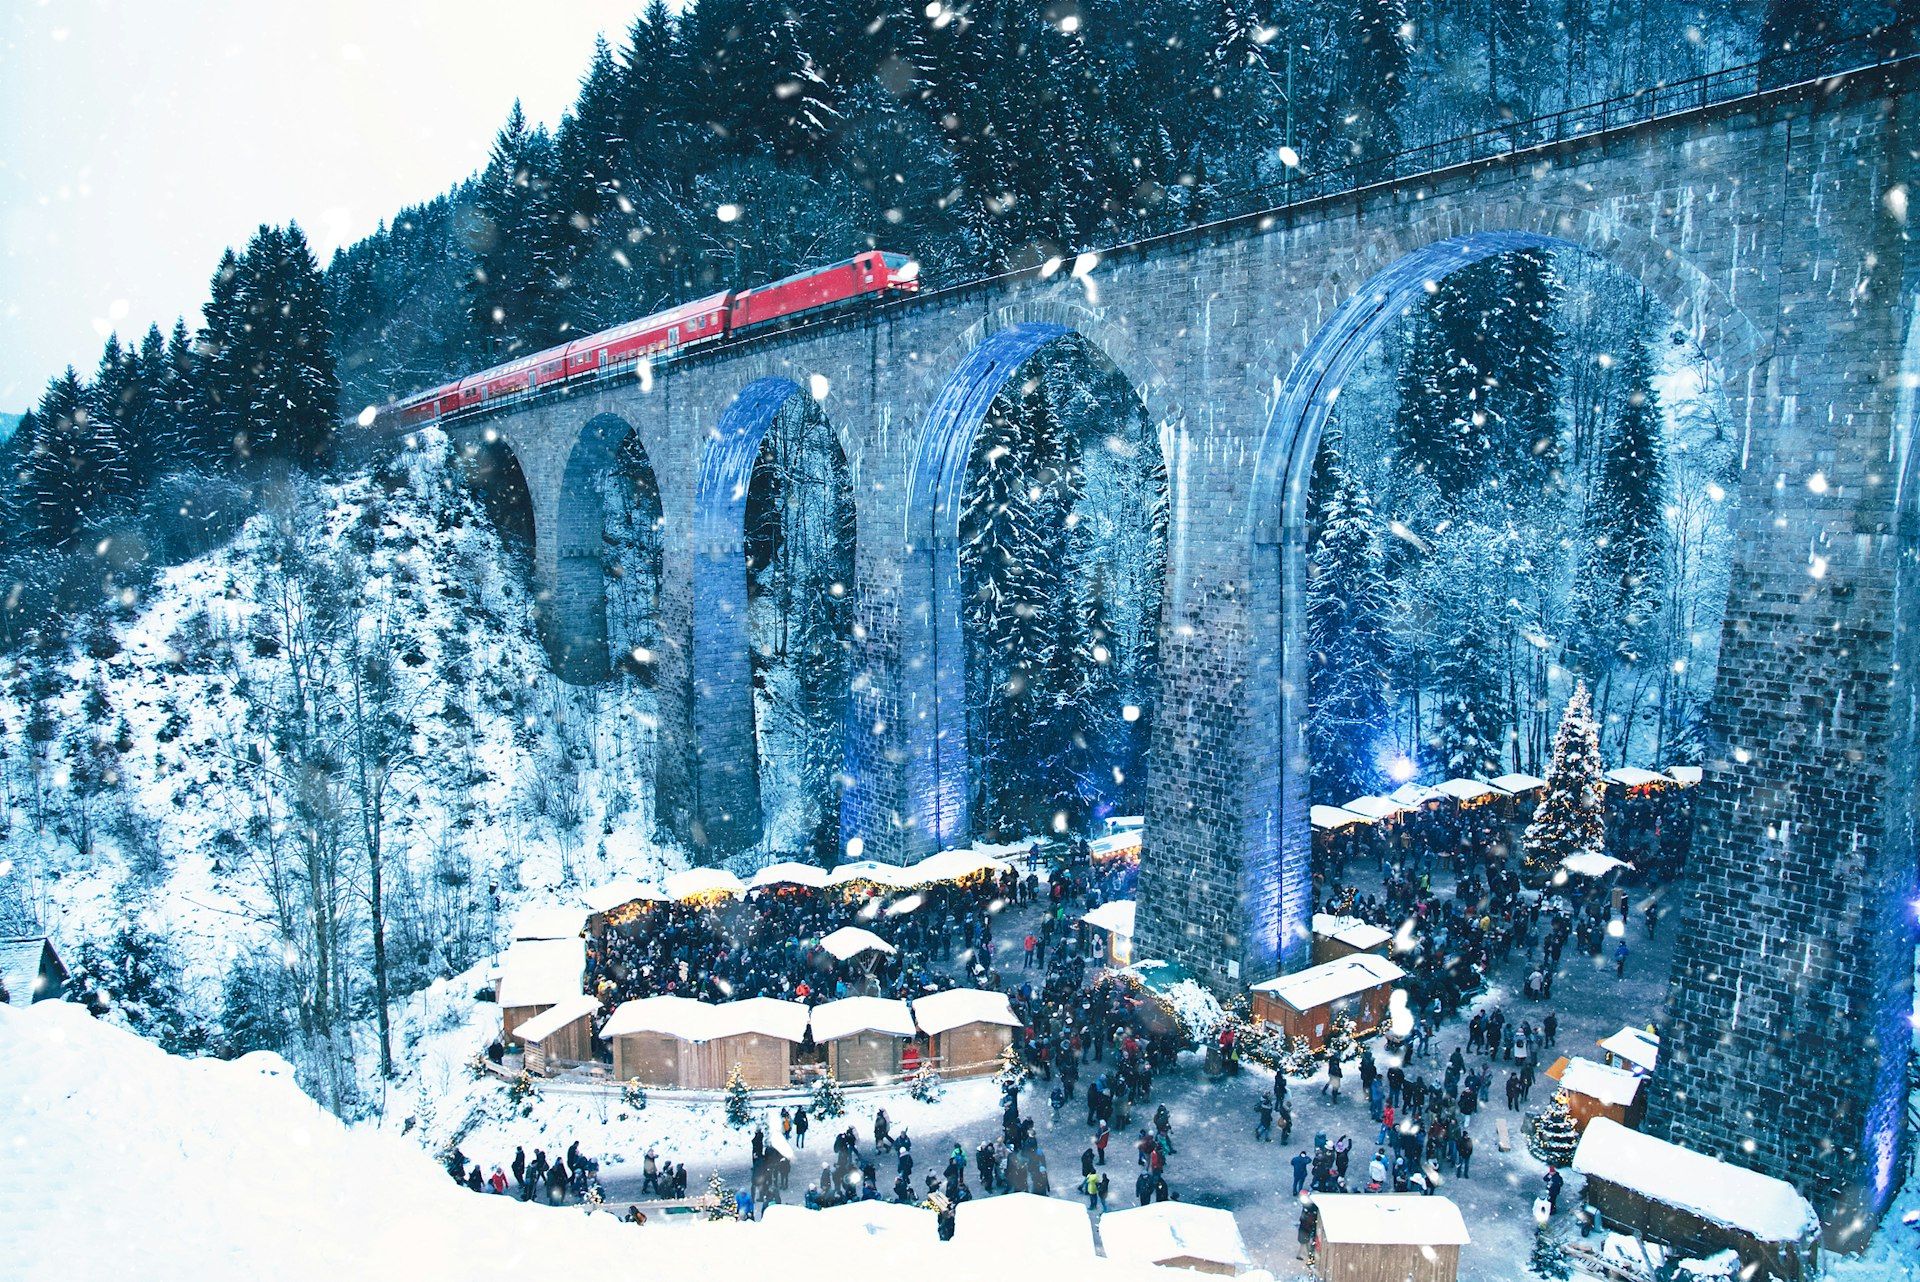 Traditional Christmas market in the Ravenna Gorge, Germany, held under the huge aqueduct with a train passing over it while it's snowing.